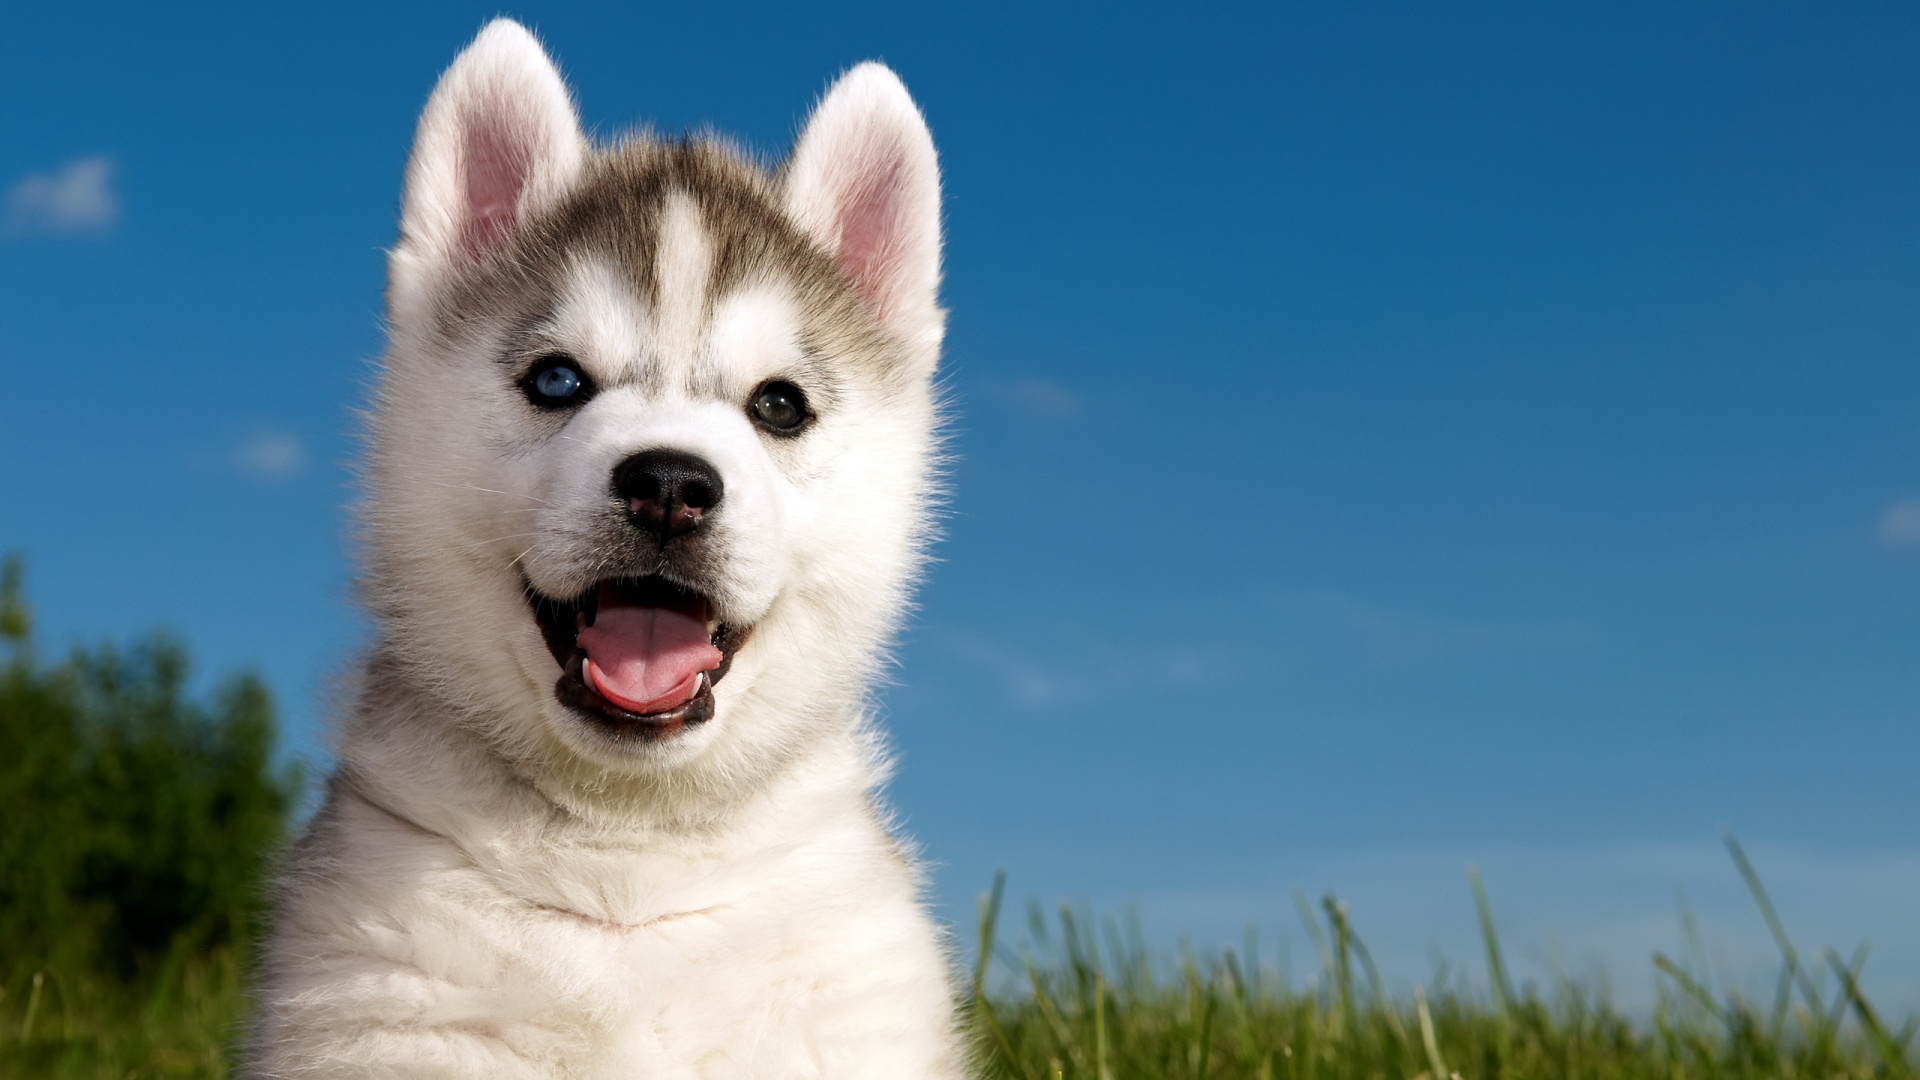 White and Black Siberian Husky Puppy on Green Grass Field During Daytime. Wallpaper in 1920x1080 Resolution